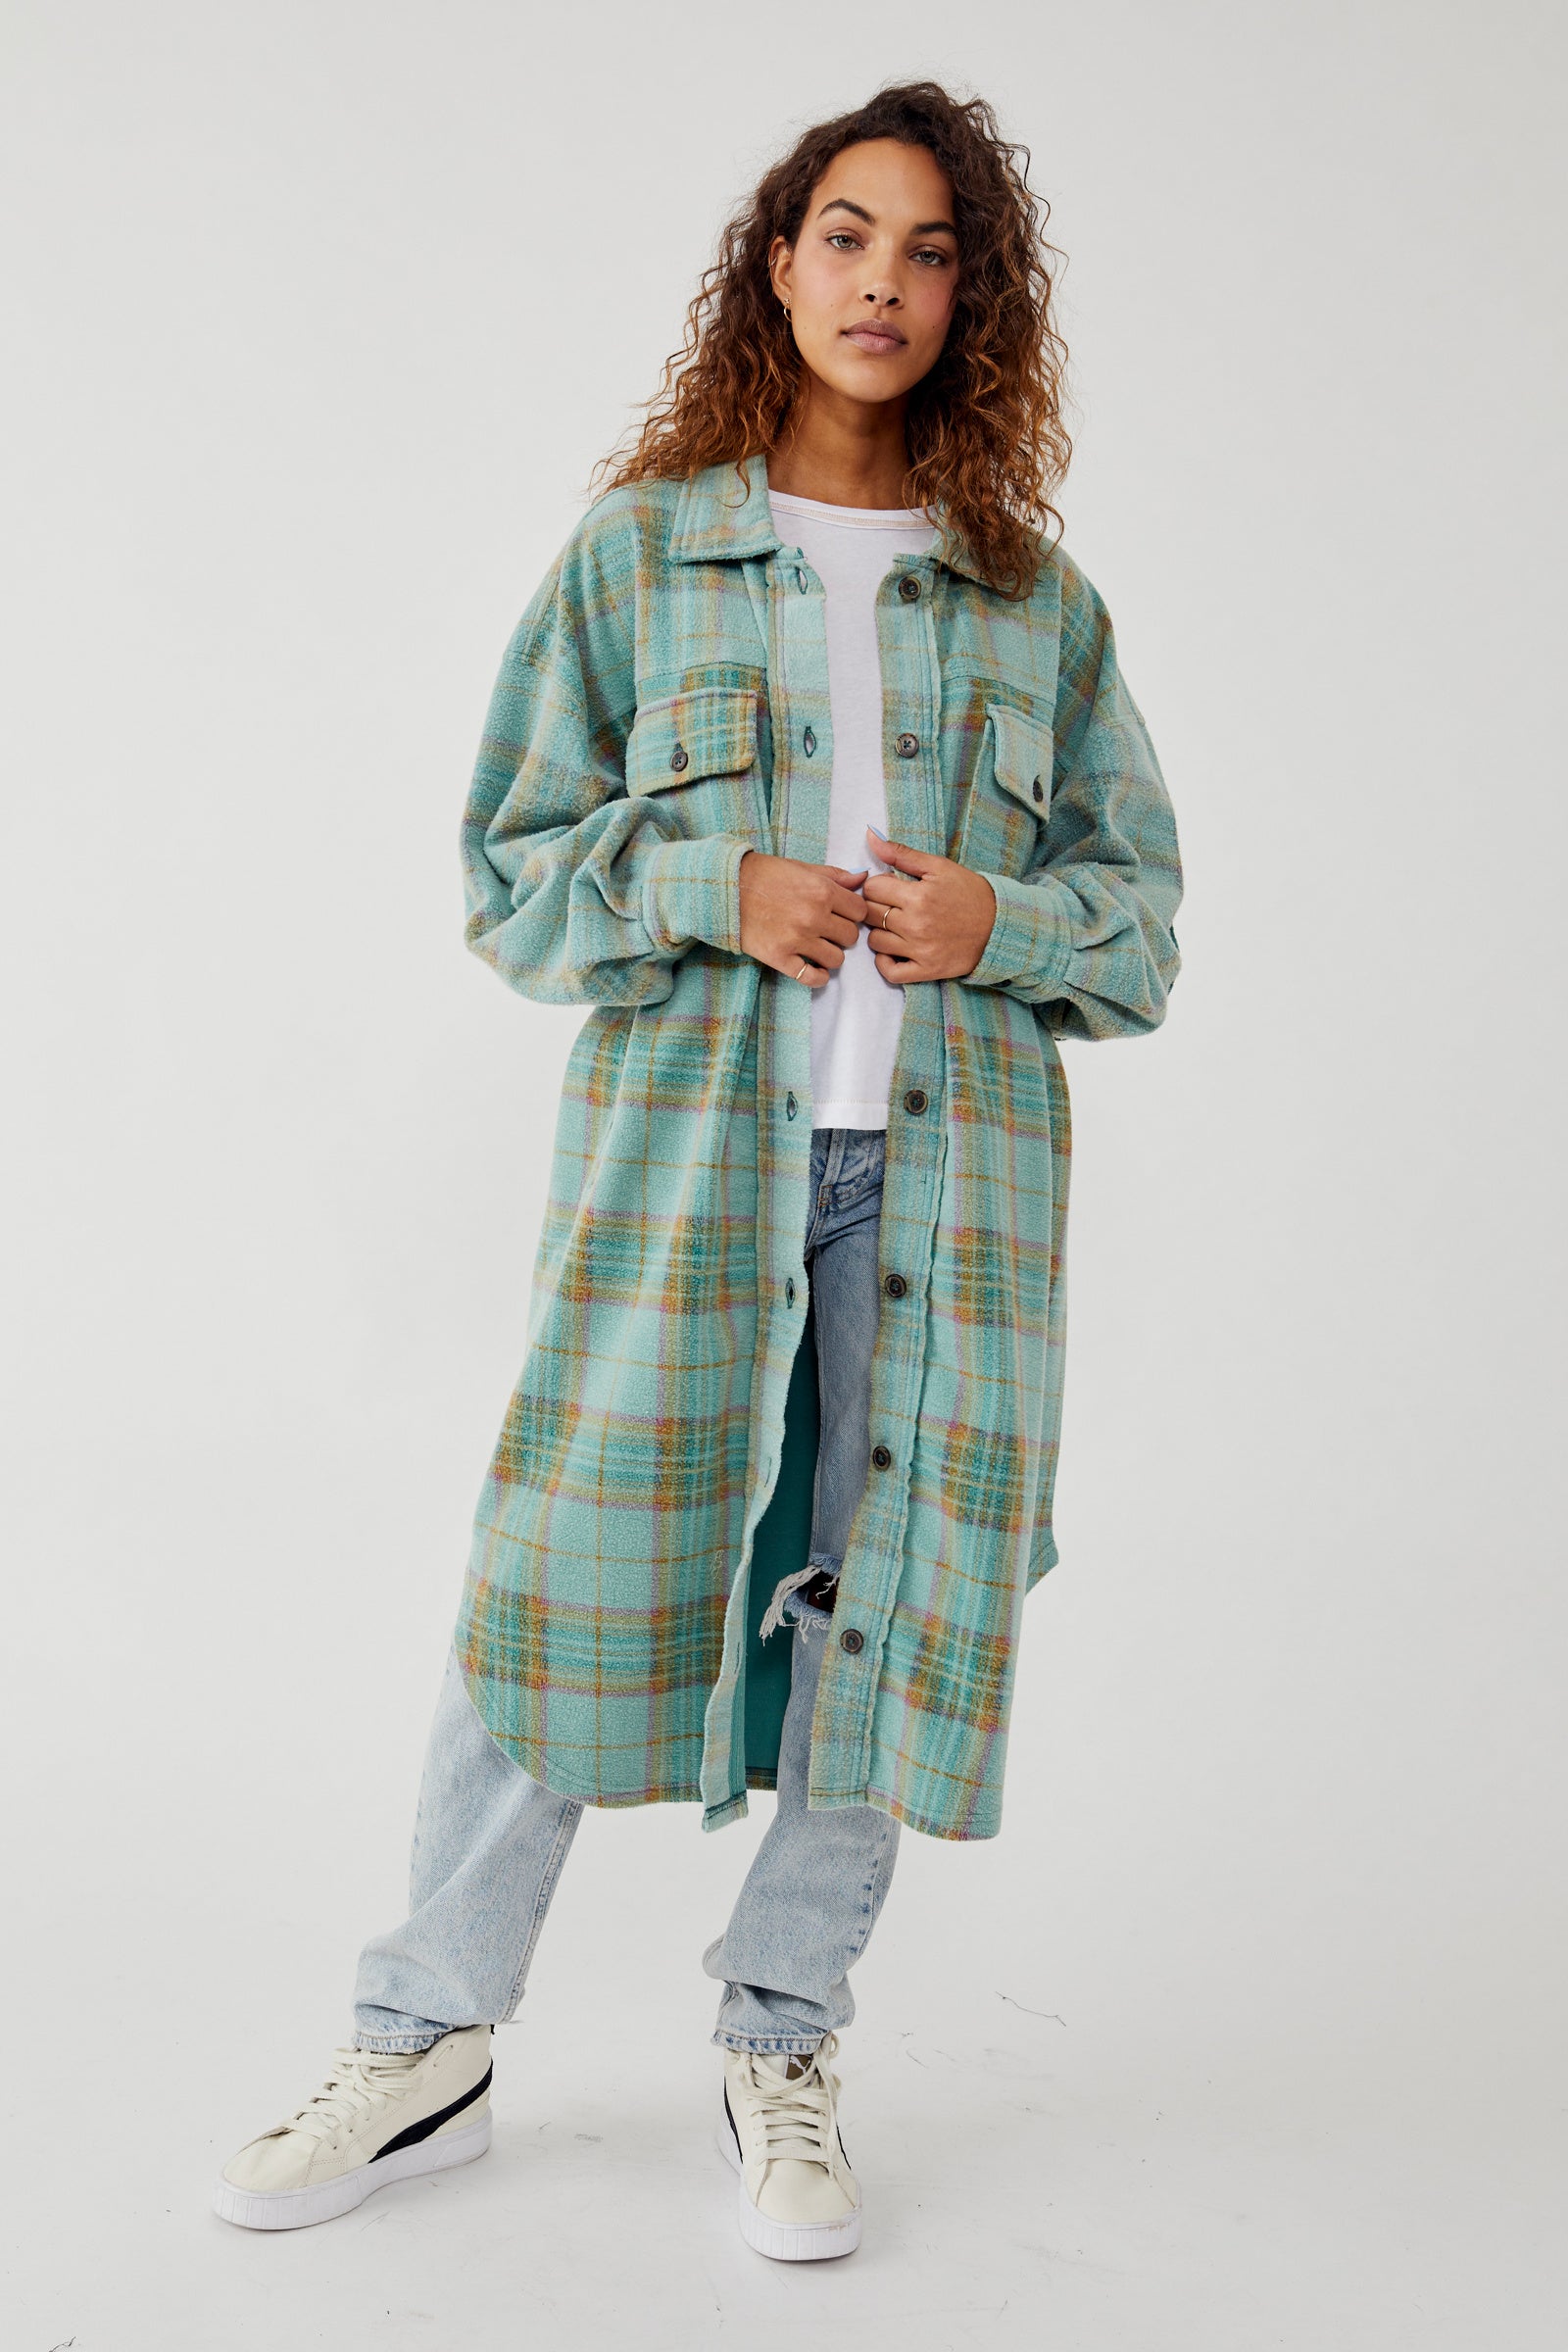 FREE PEOPLE PLAID LONG RUBY IN SAGE COMBO